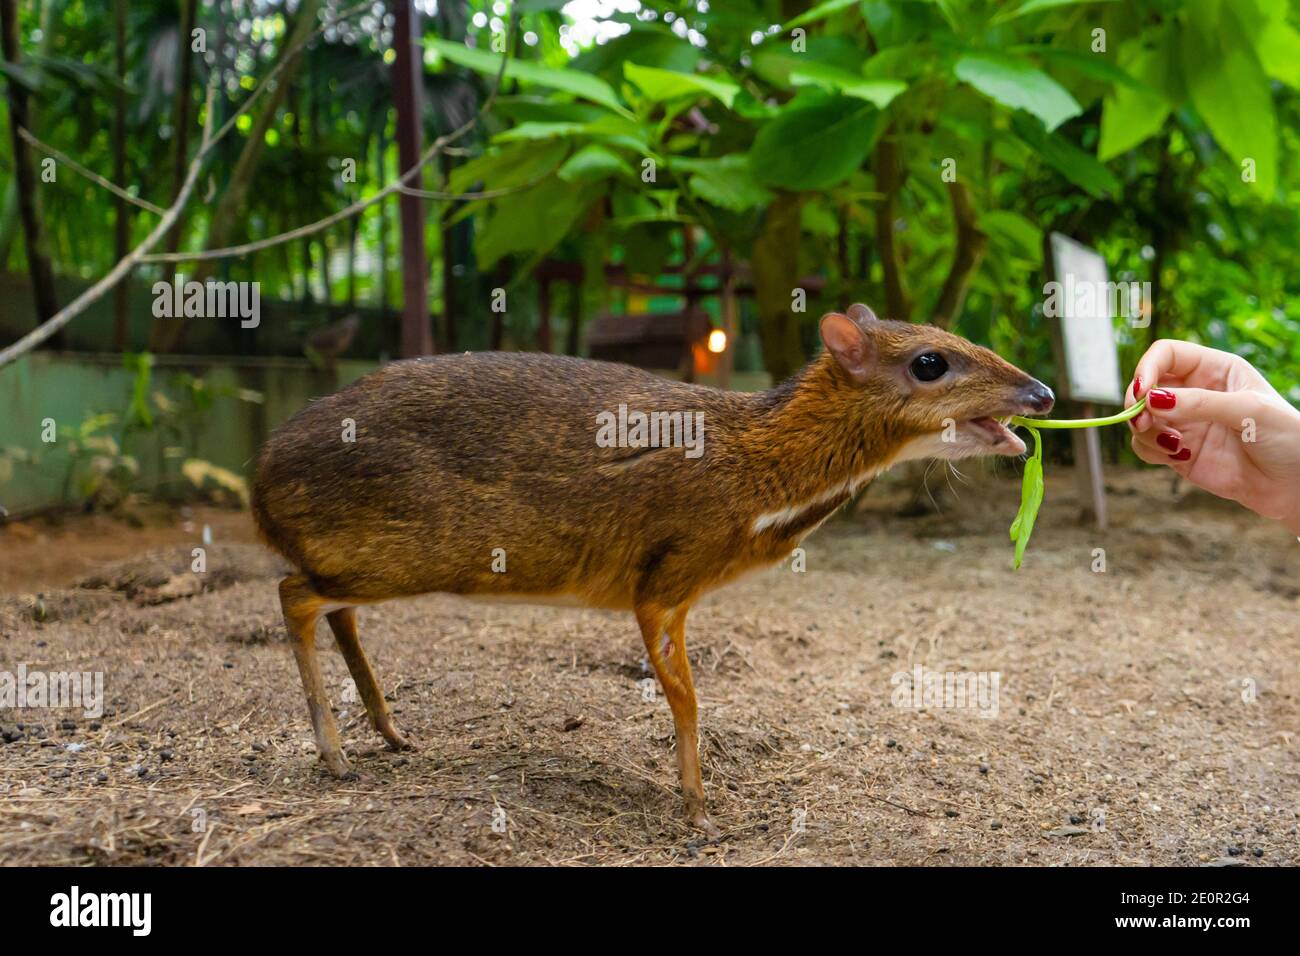 Mouse Deer Zoo Animal High Resolution Stock Photography And Images Alamy